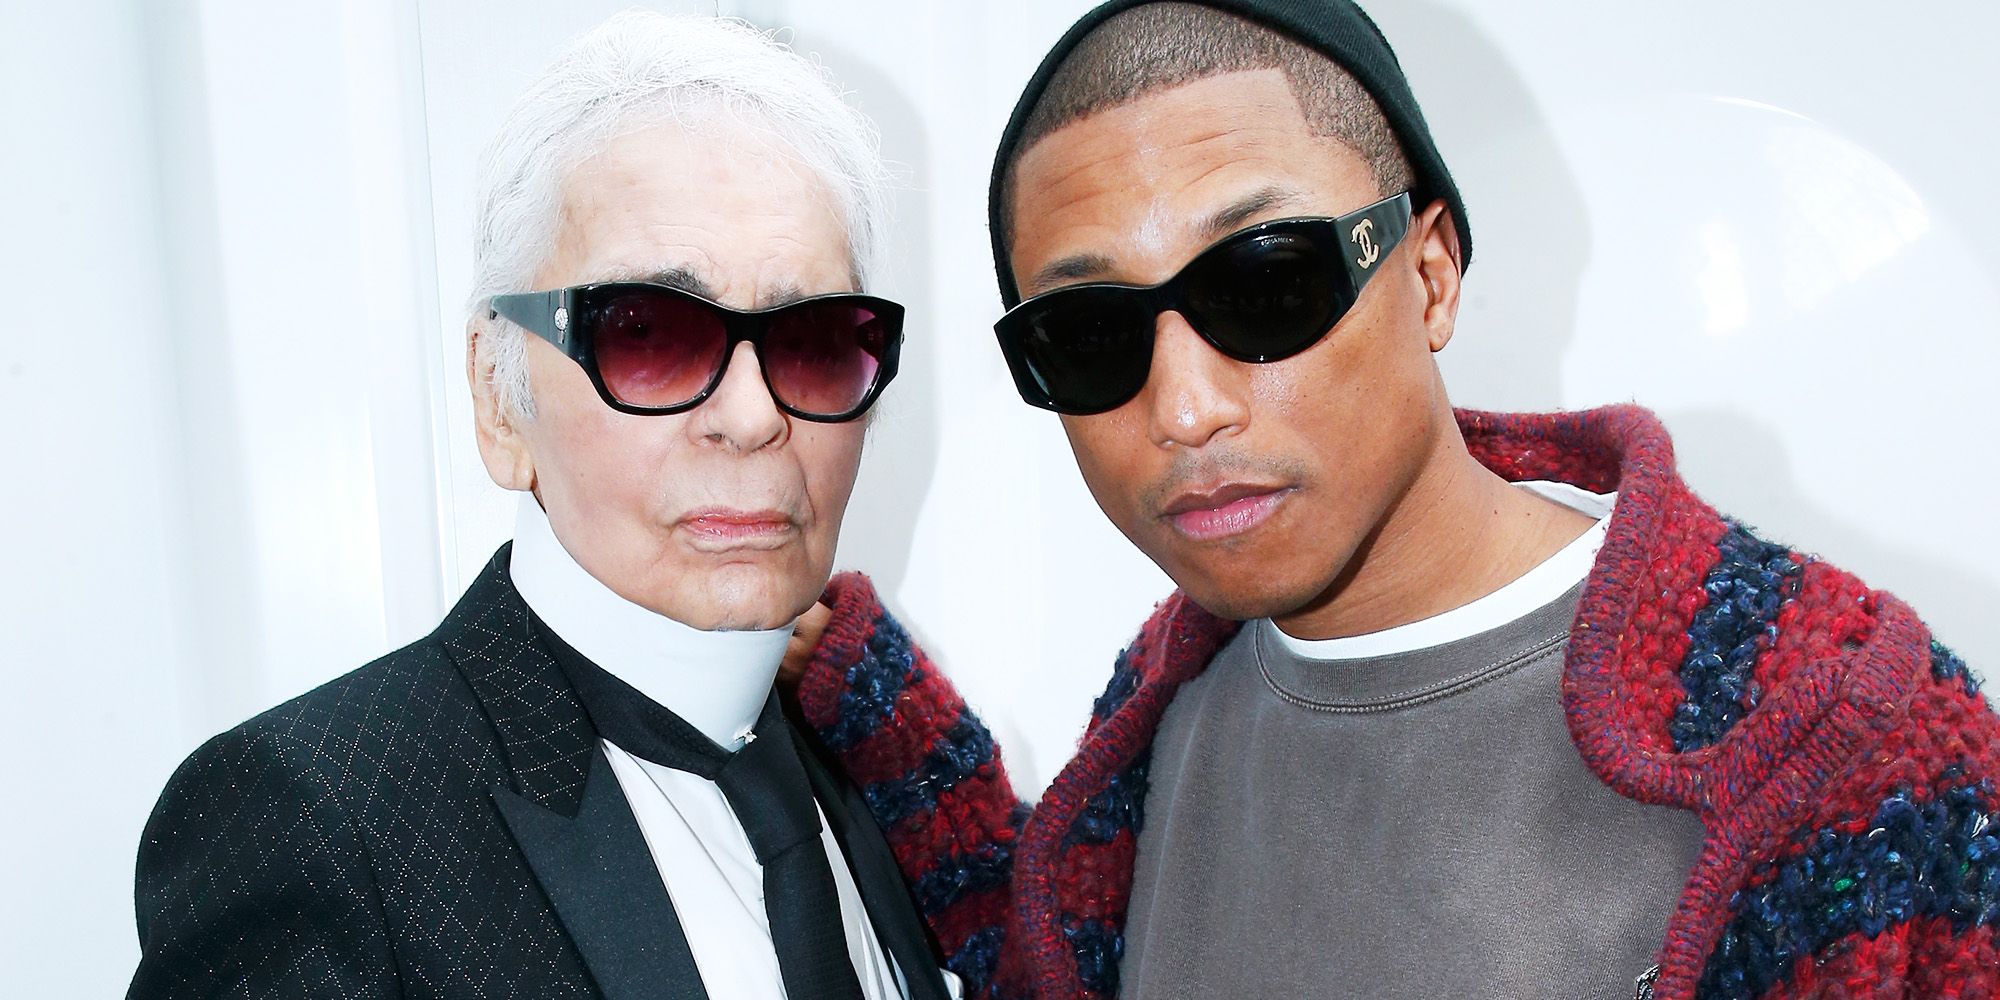 Chanel Debuts Latest Campaign Starring Pharrell Williams And Cara